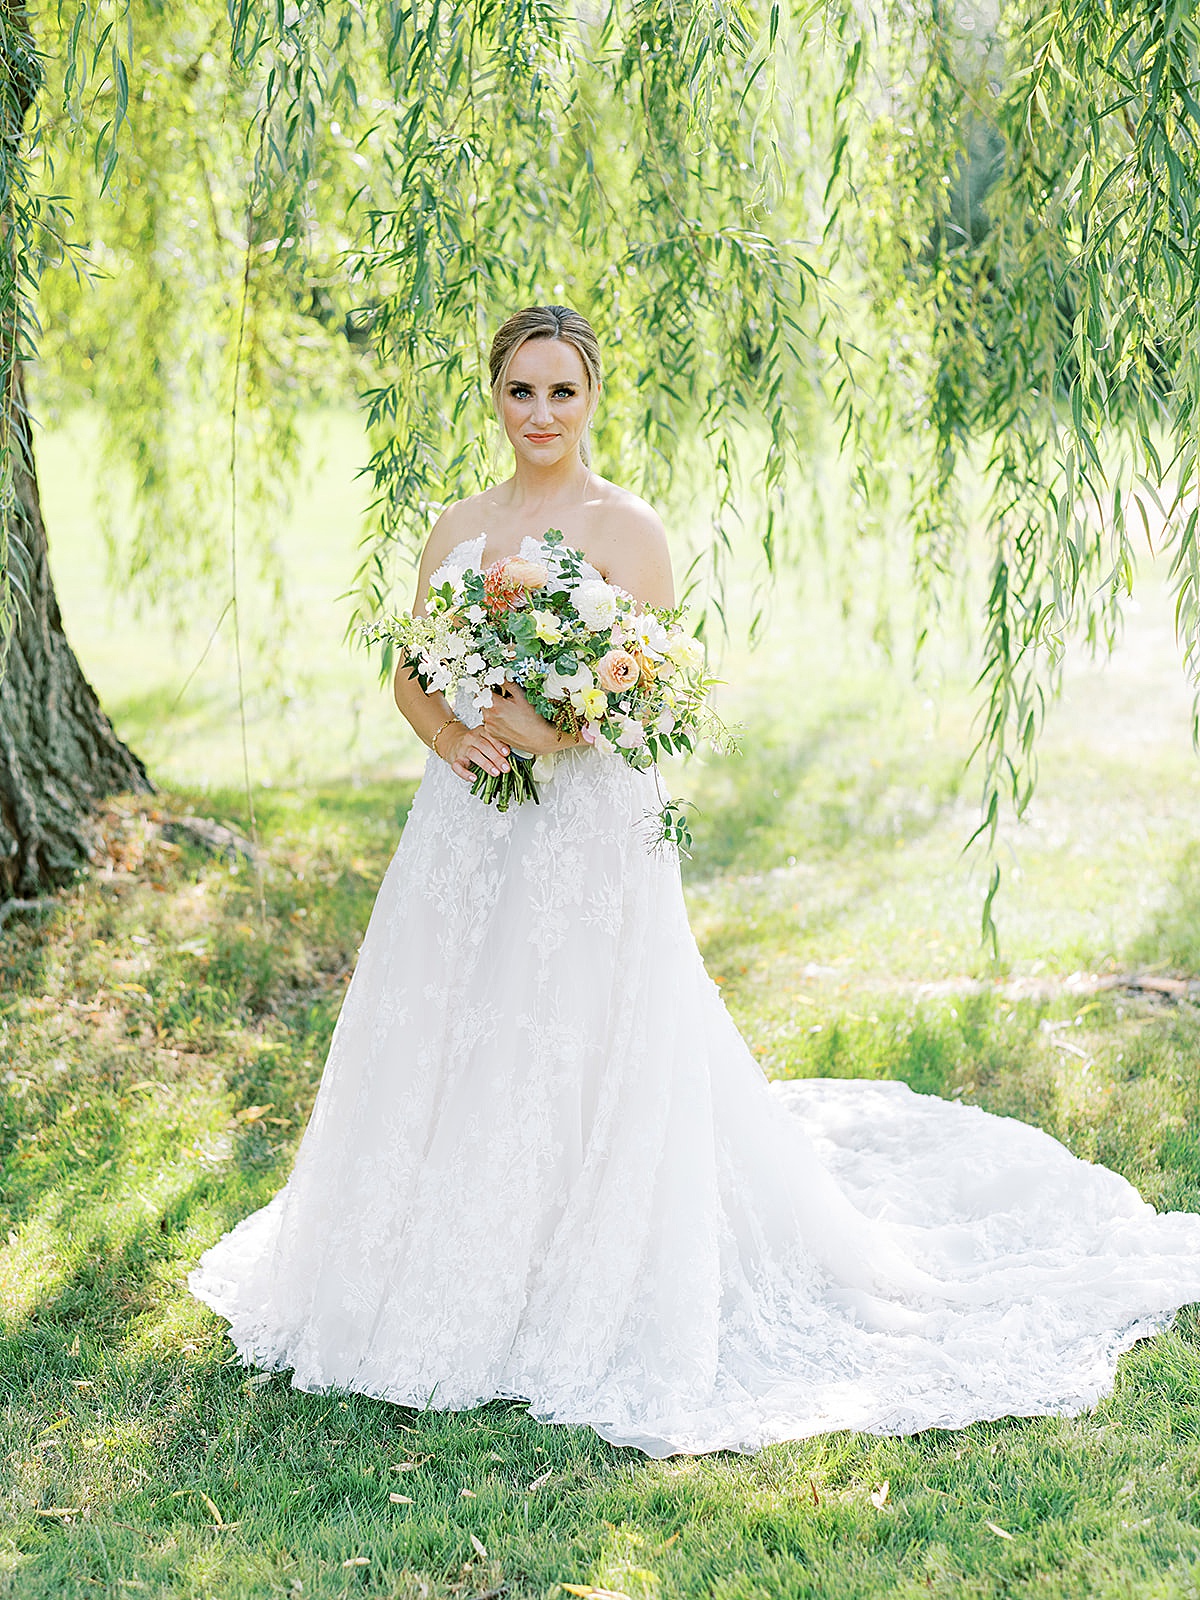 Bride poses in embroidered lace wedding gown holding pastel bouquet in front of weeping willow shot by Sophie Kaye photography